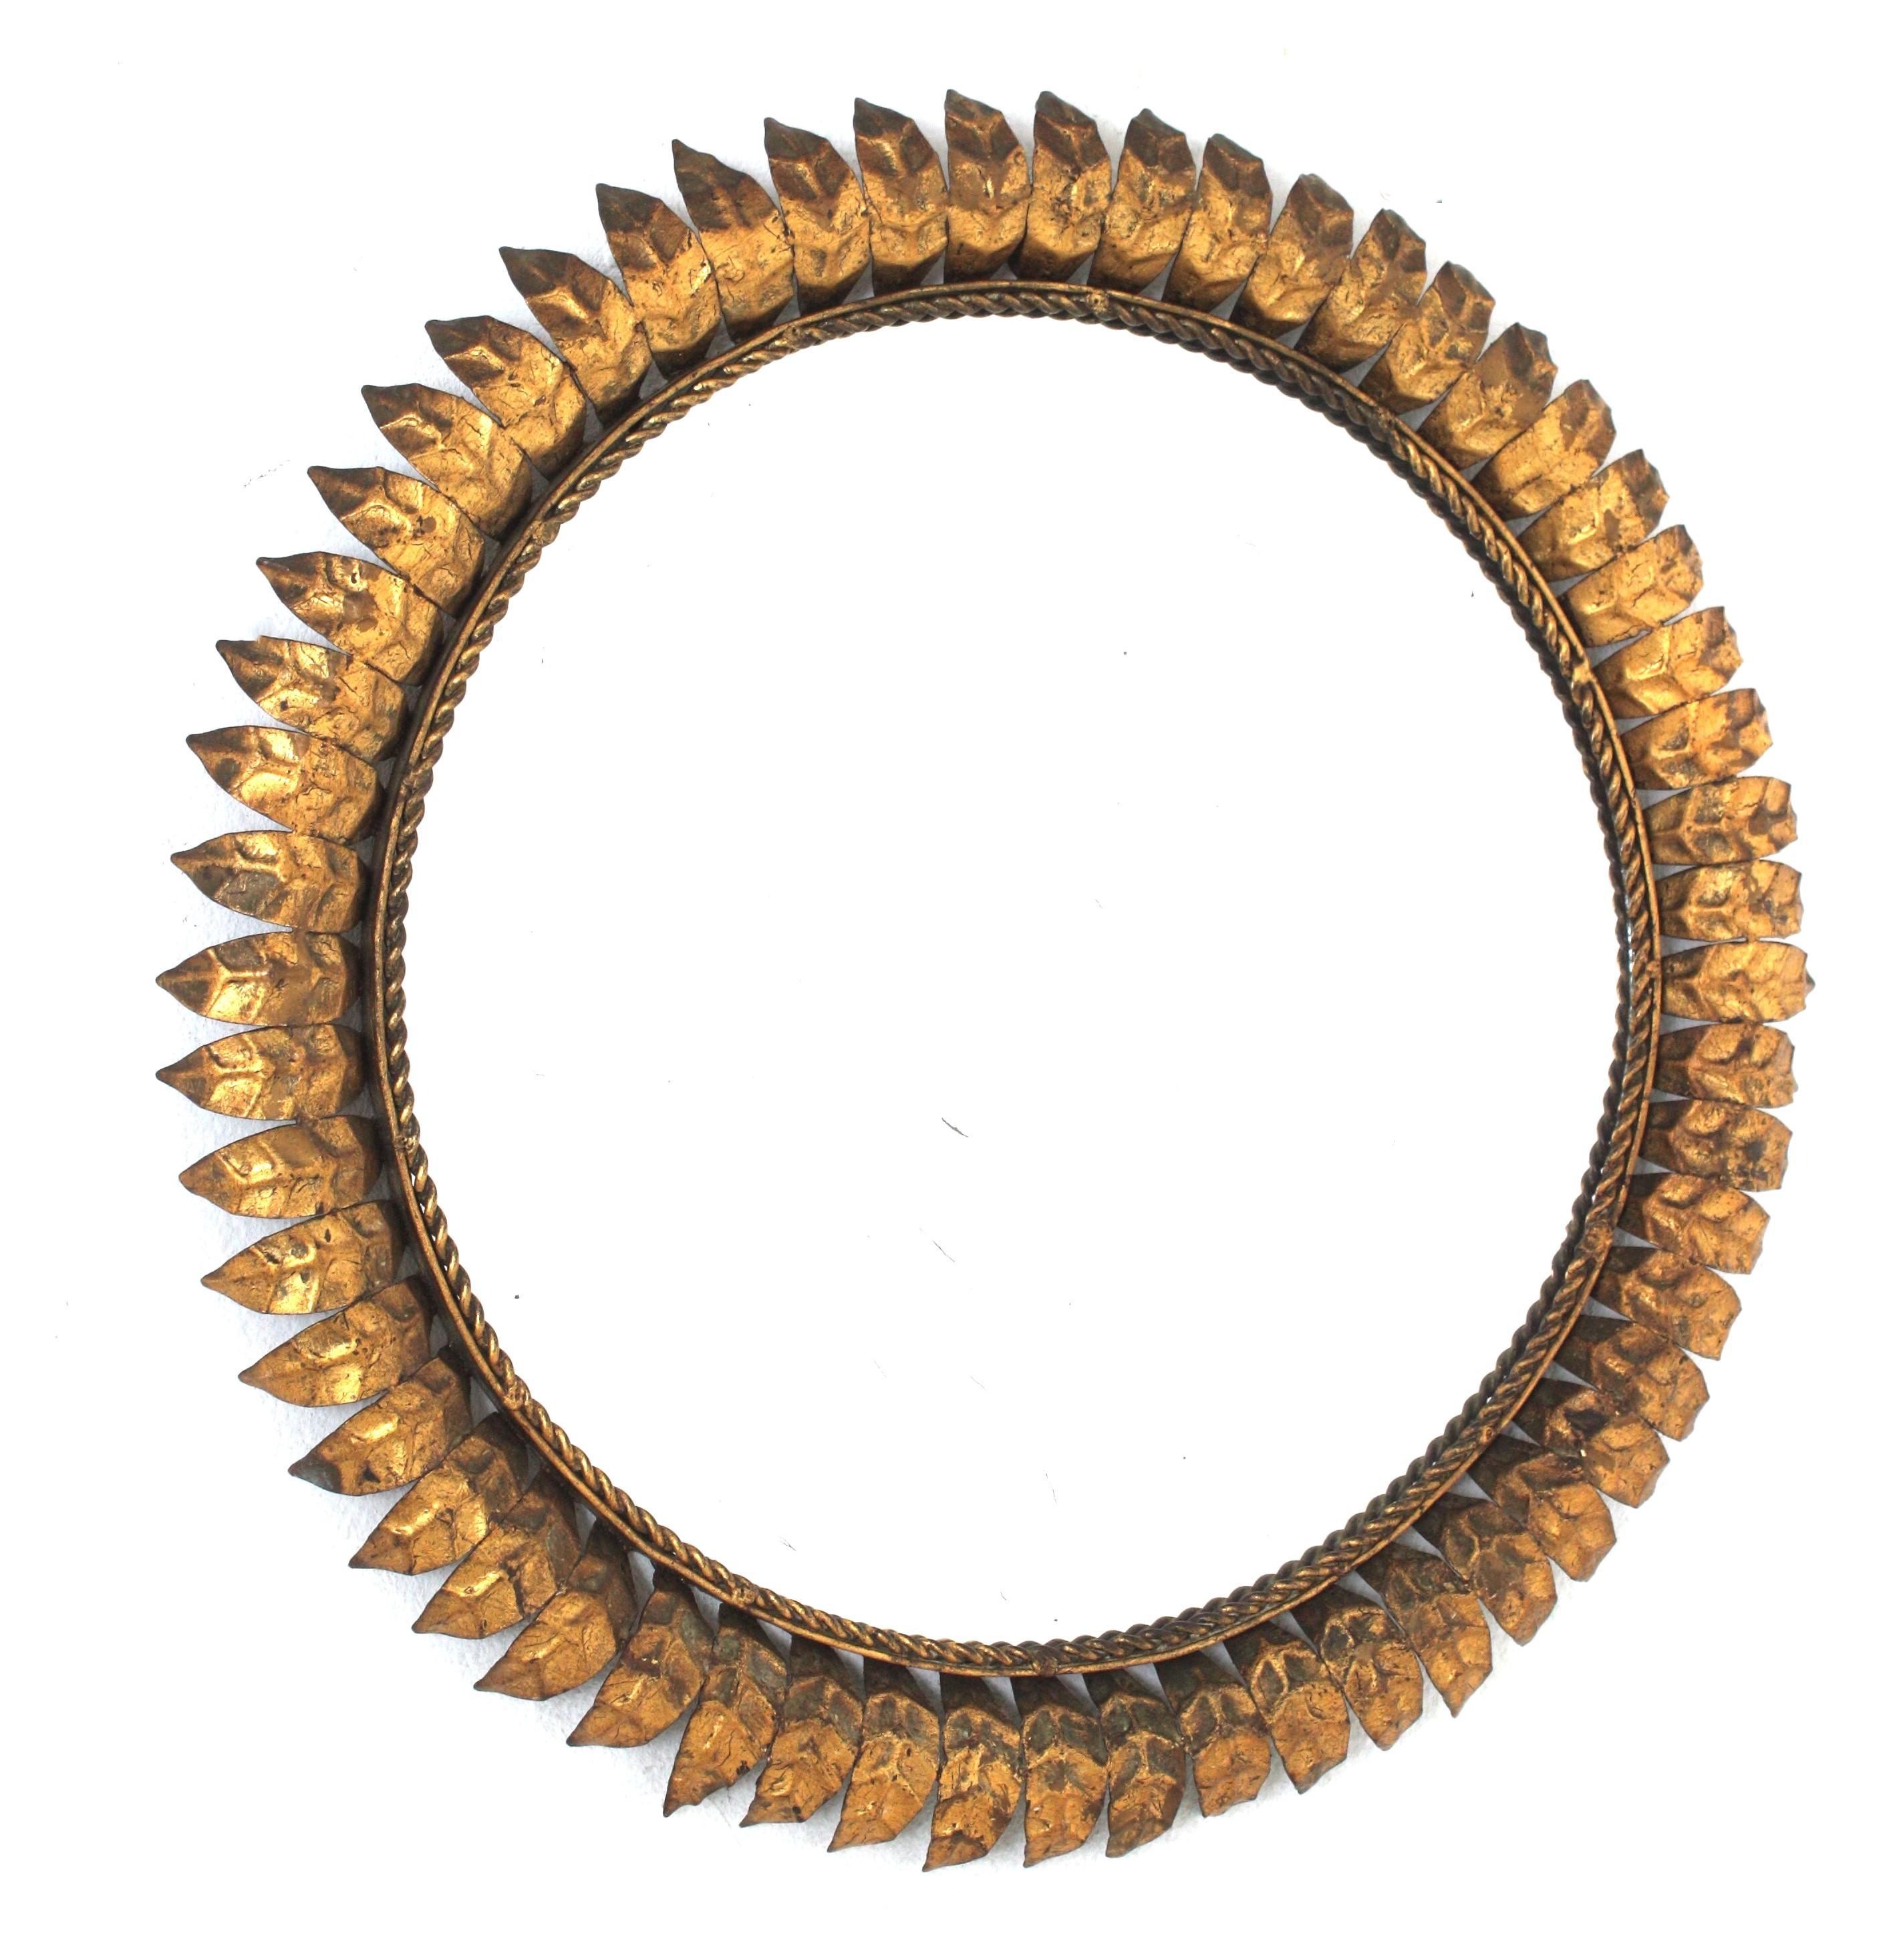 Mid-Century Modern iron sunburst round mirror with leafed frame and gold leaf finish, Spain, 1950s.
This eye-catching leafed sunburst mirror has a very detailed frame, entirely made in gilt iron and showing its original patina and gold leaf